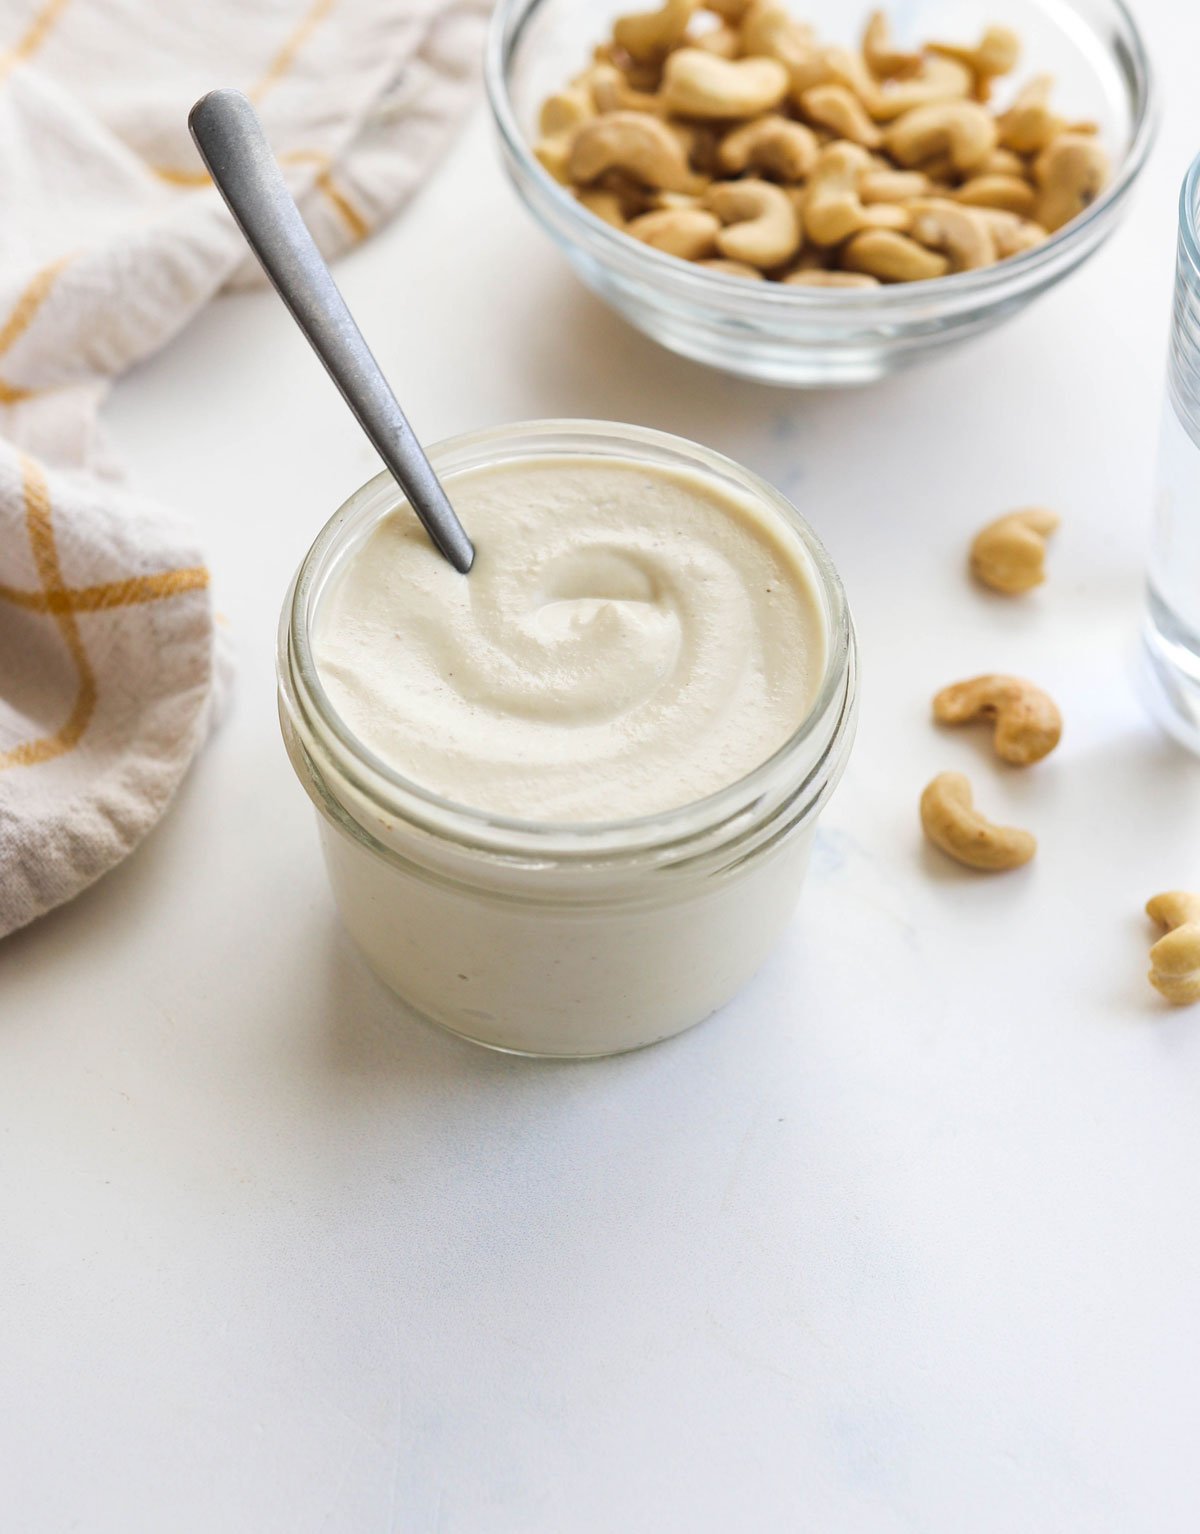 cashew cream in a glass jar with spoon